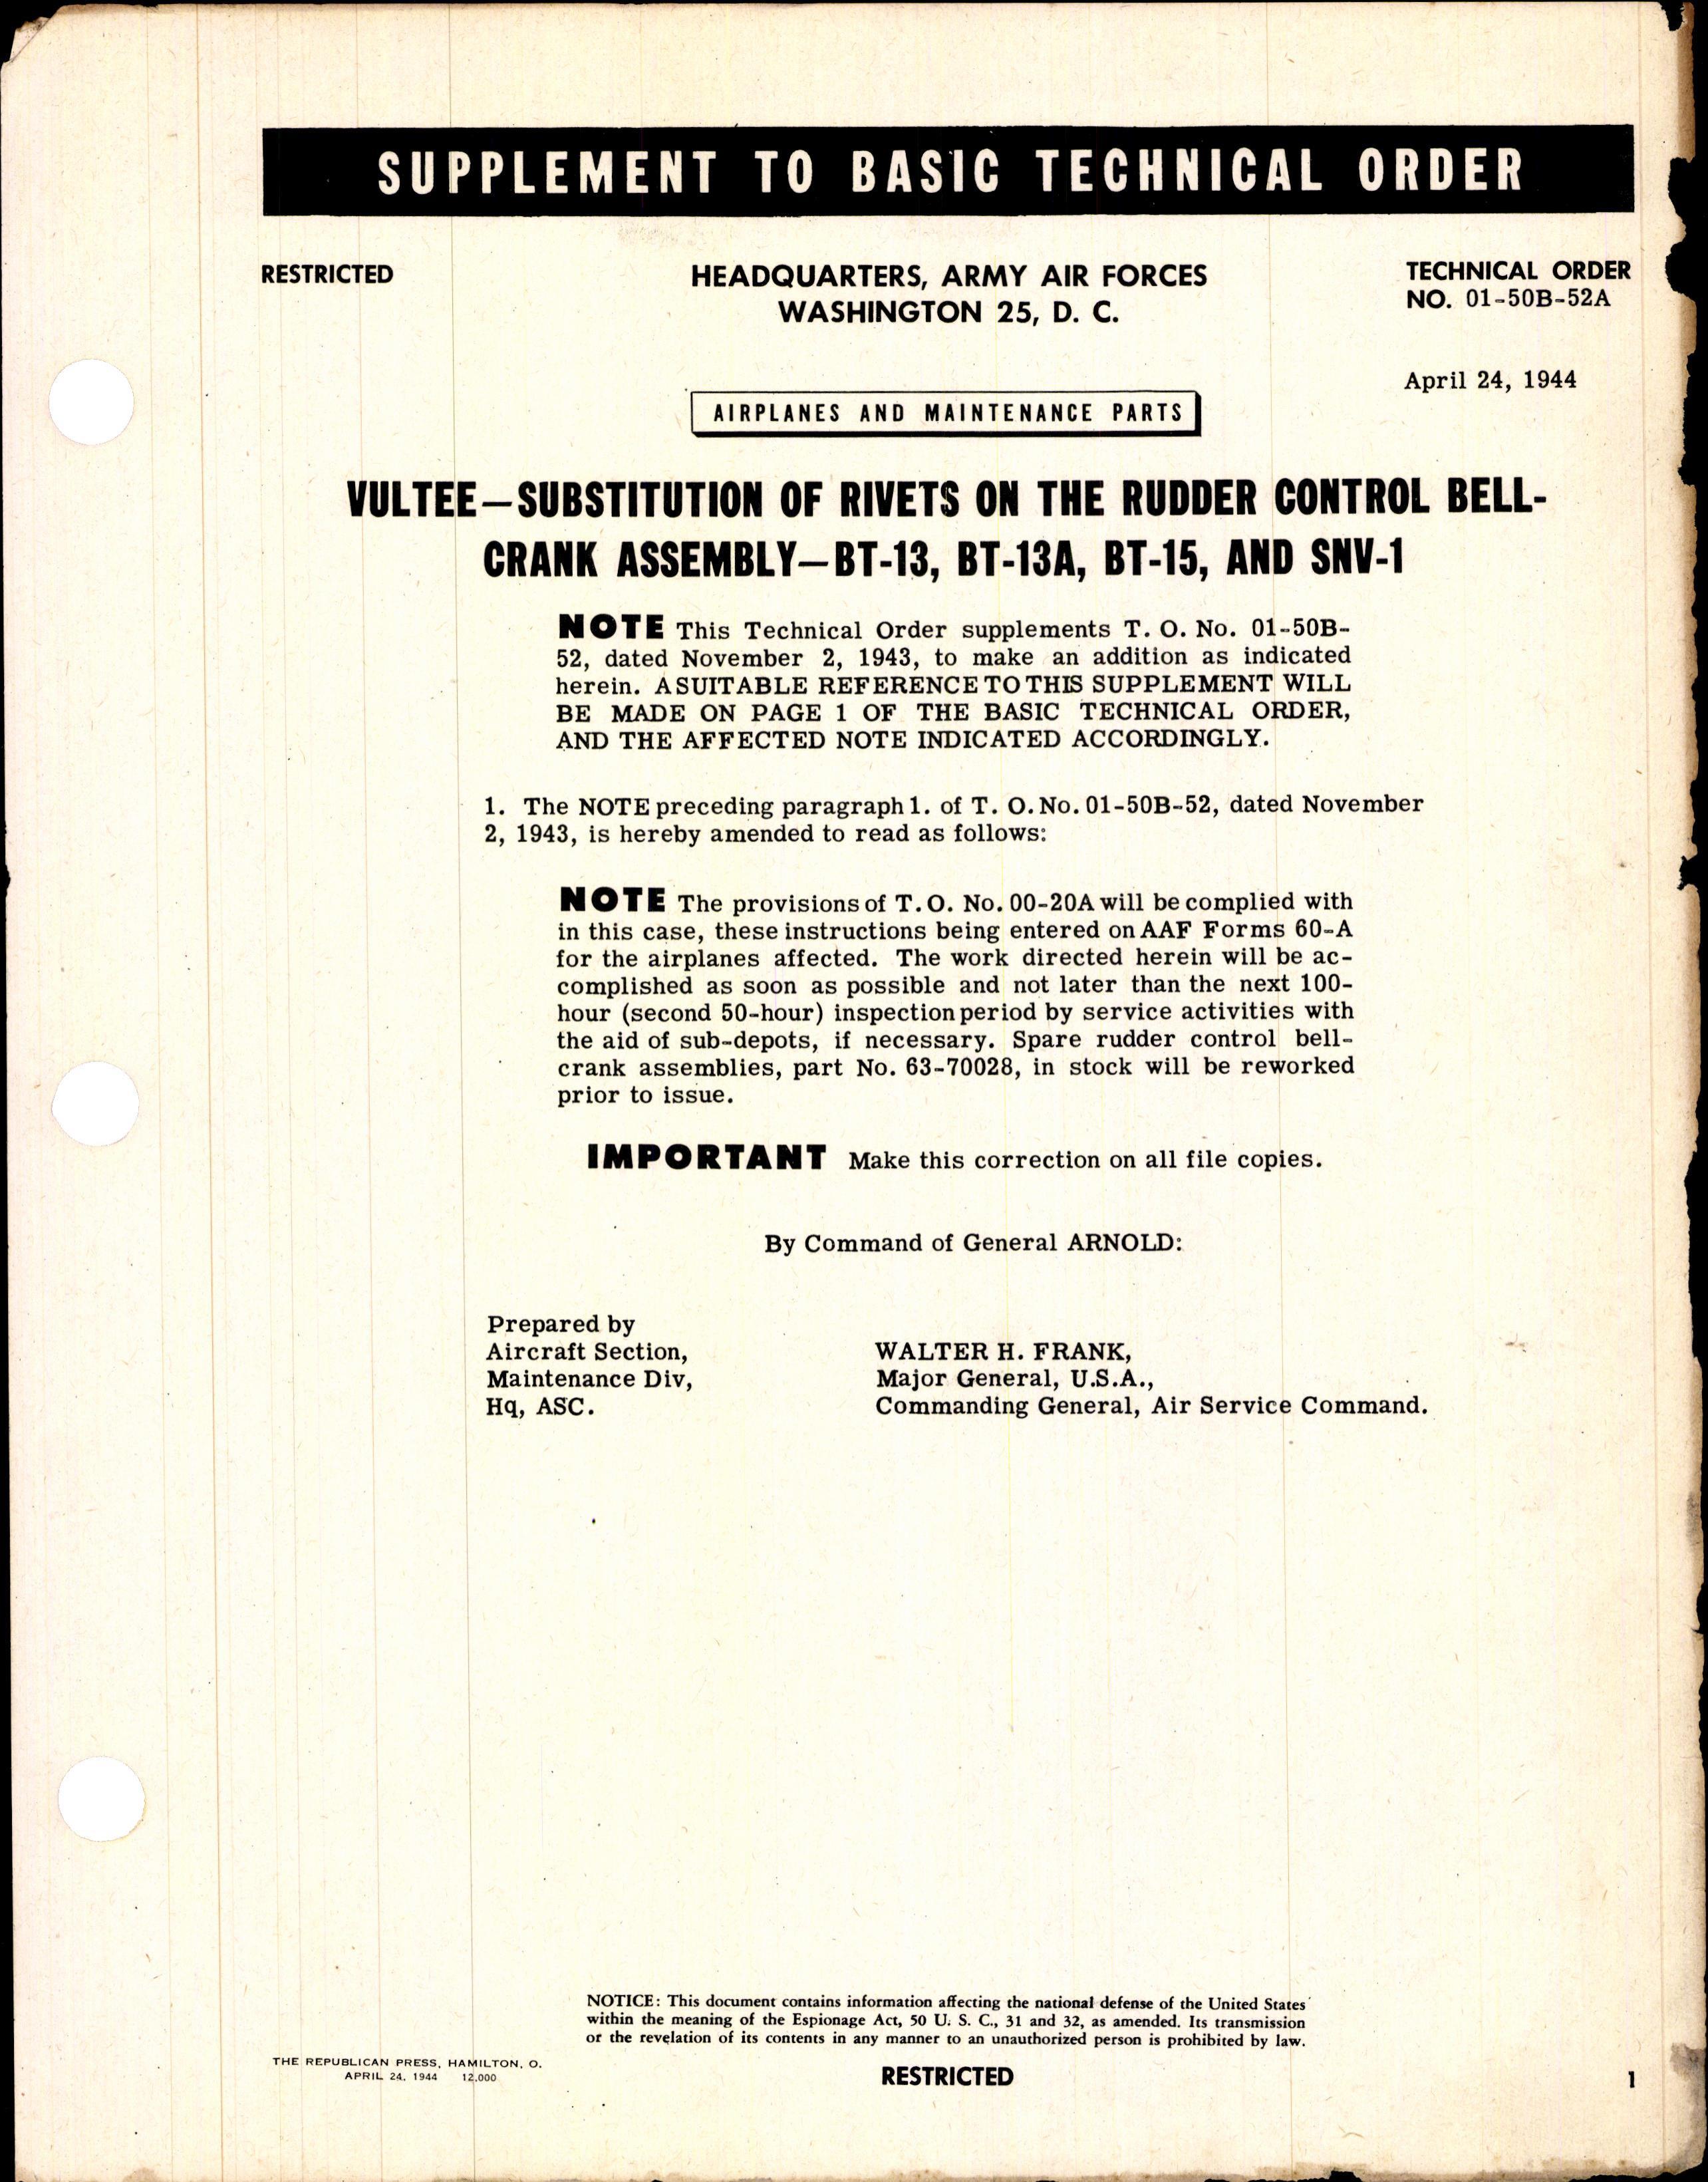 Sample page 1 from AirCorps Library document: Substitution of Rivets on the Rudder Control Bell Crank Assembly for BT-13, BT-13A, BT-15 and SNV-1